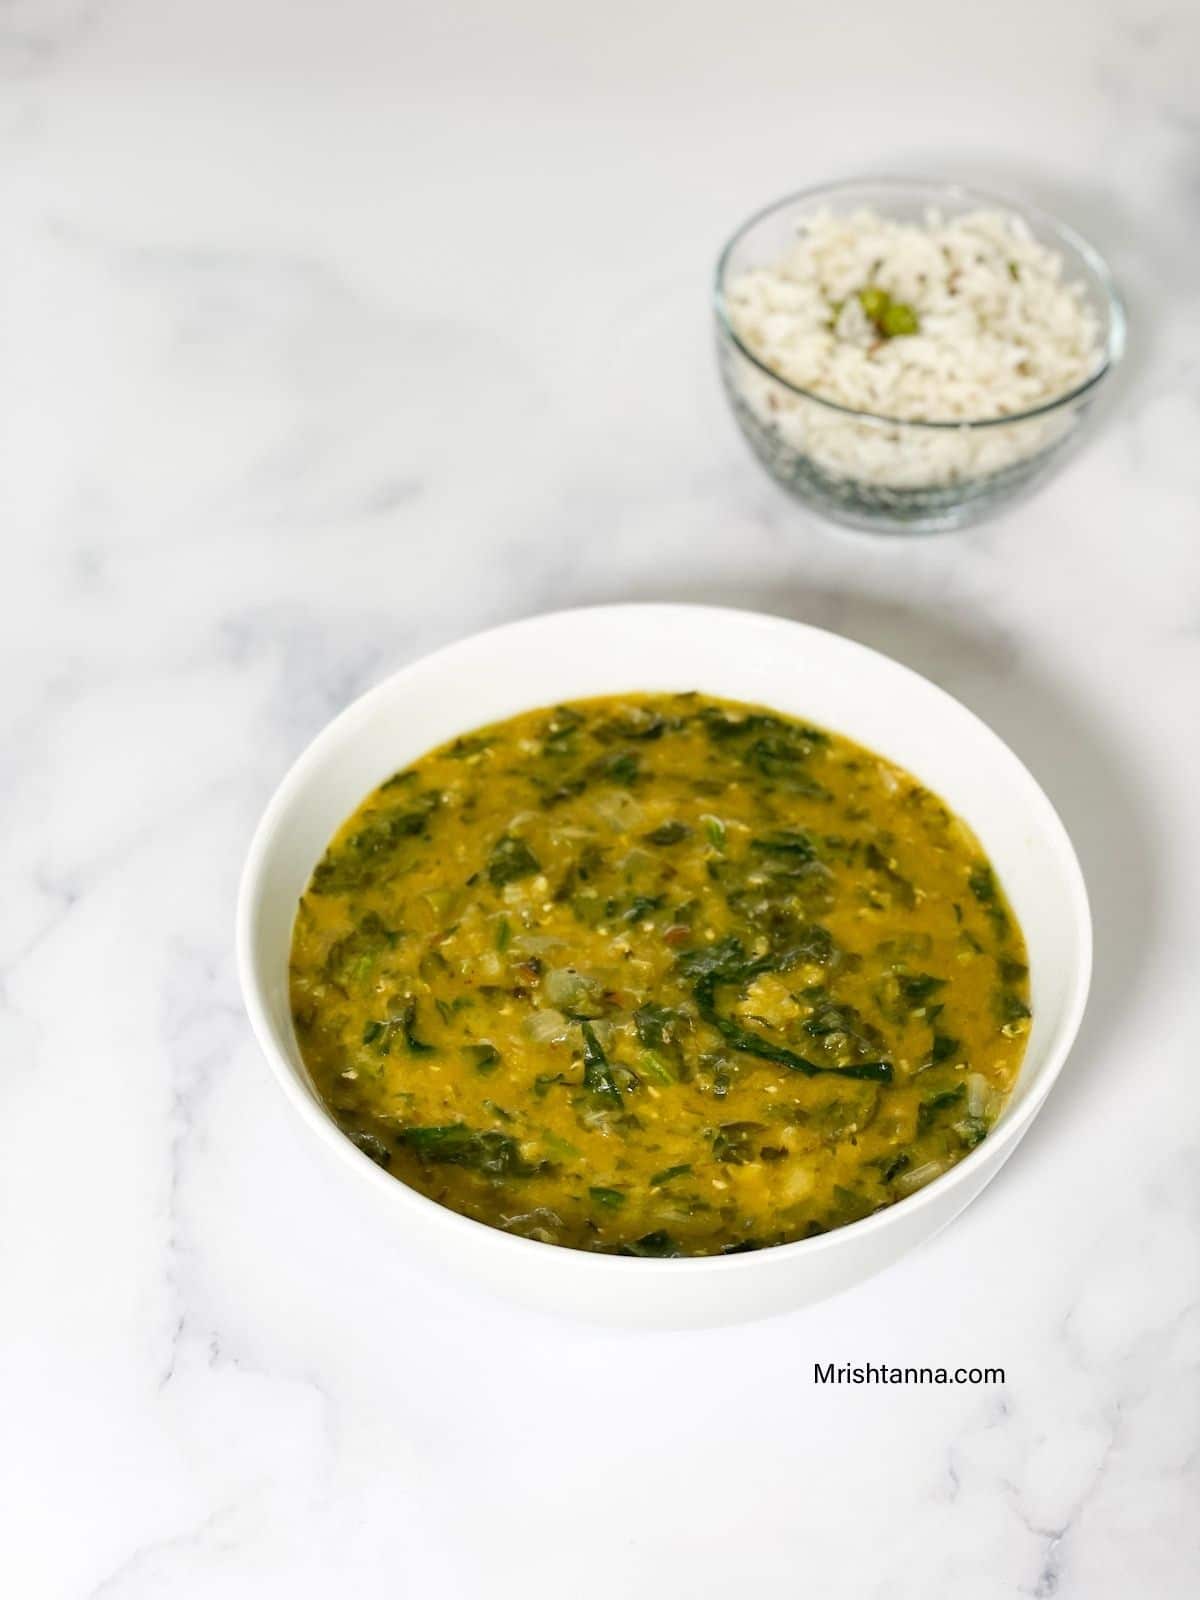 A white bowl spinach dal is on the table.